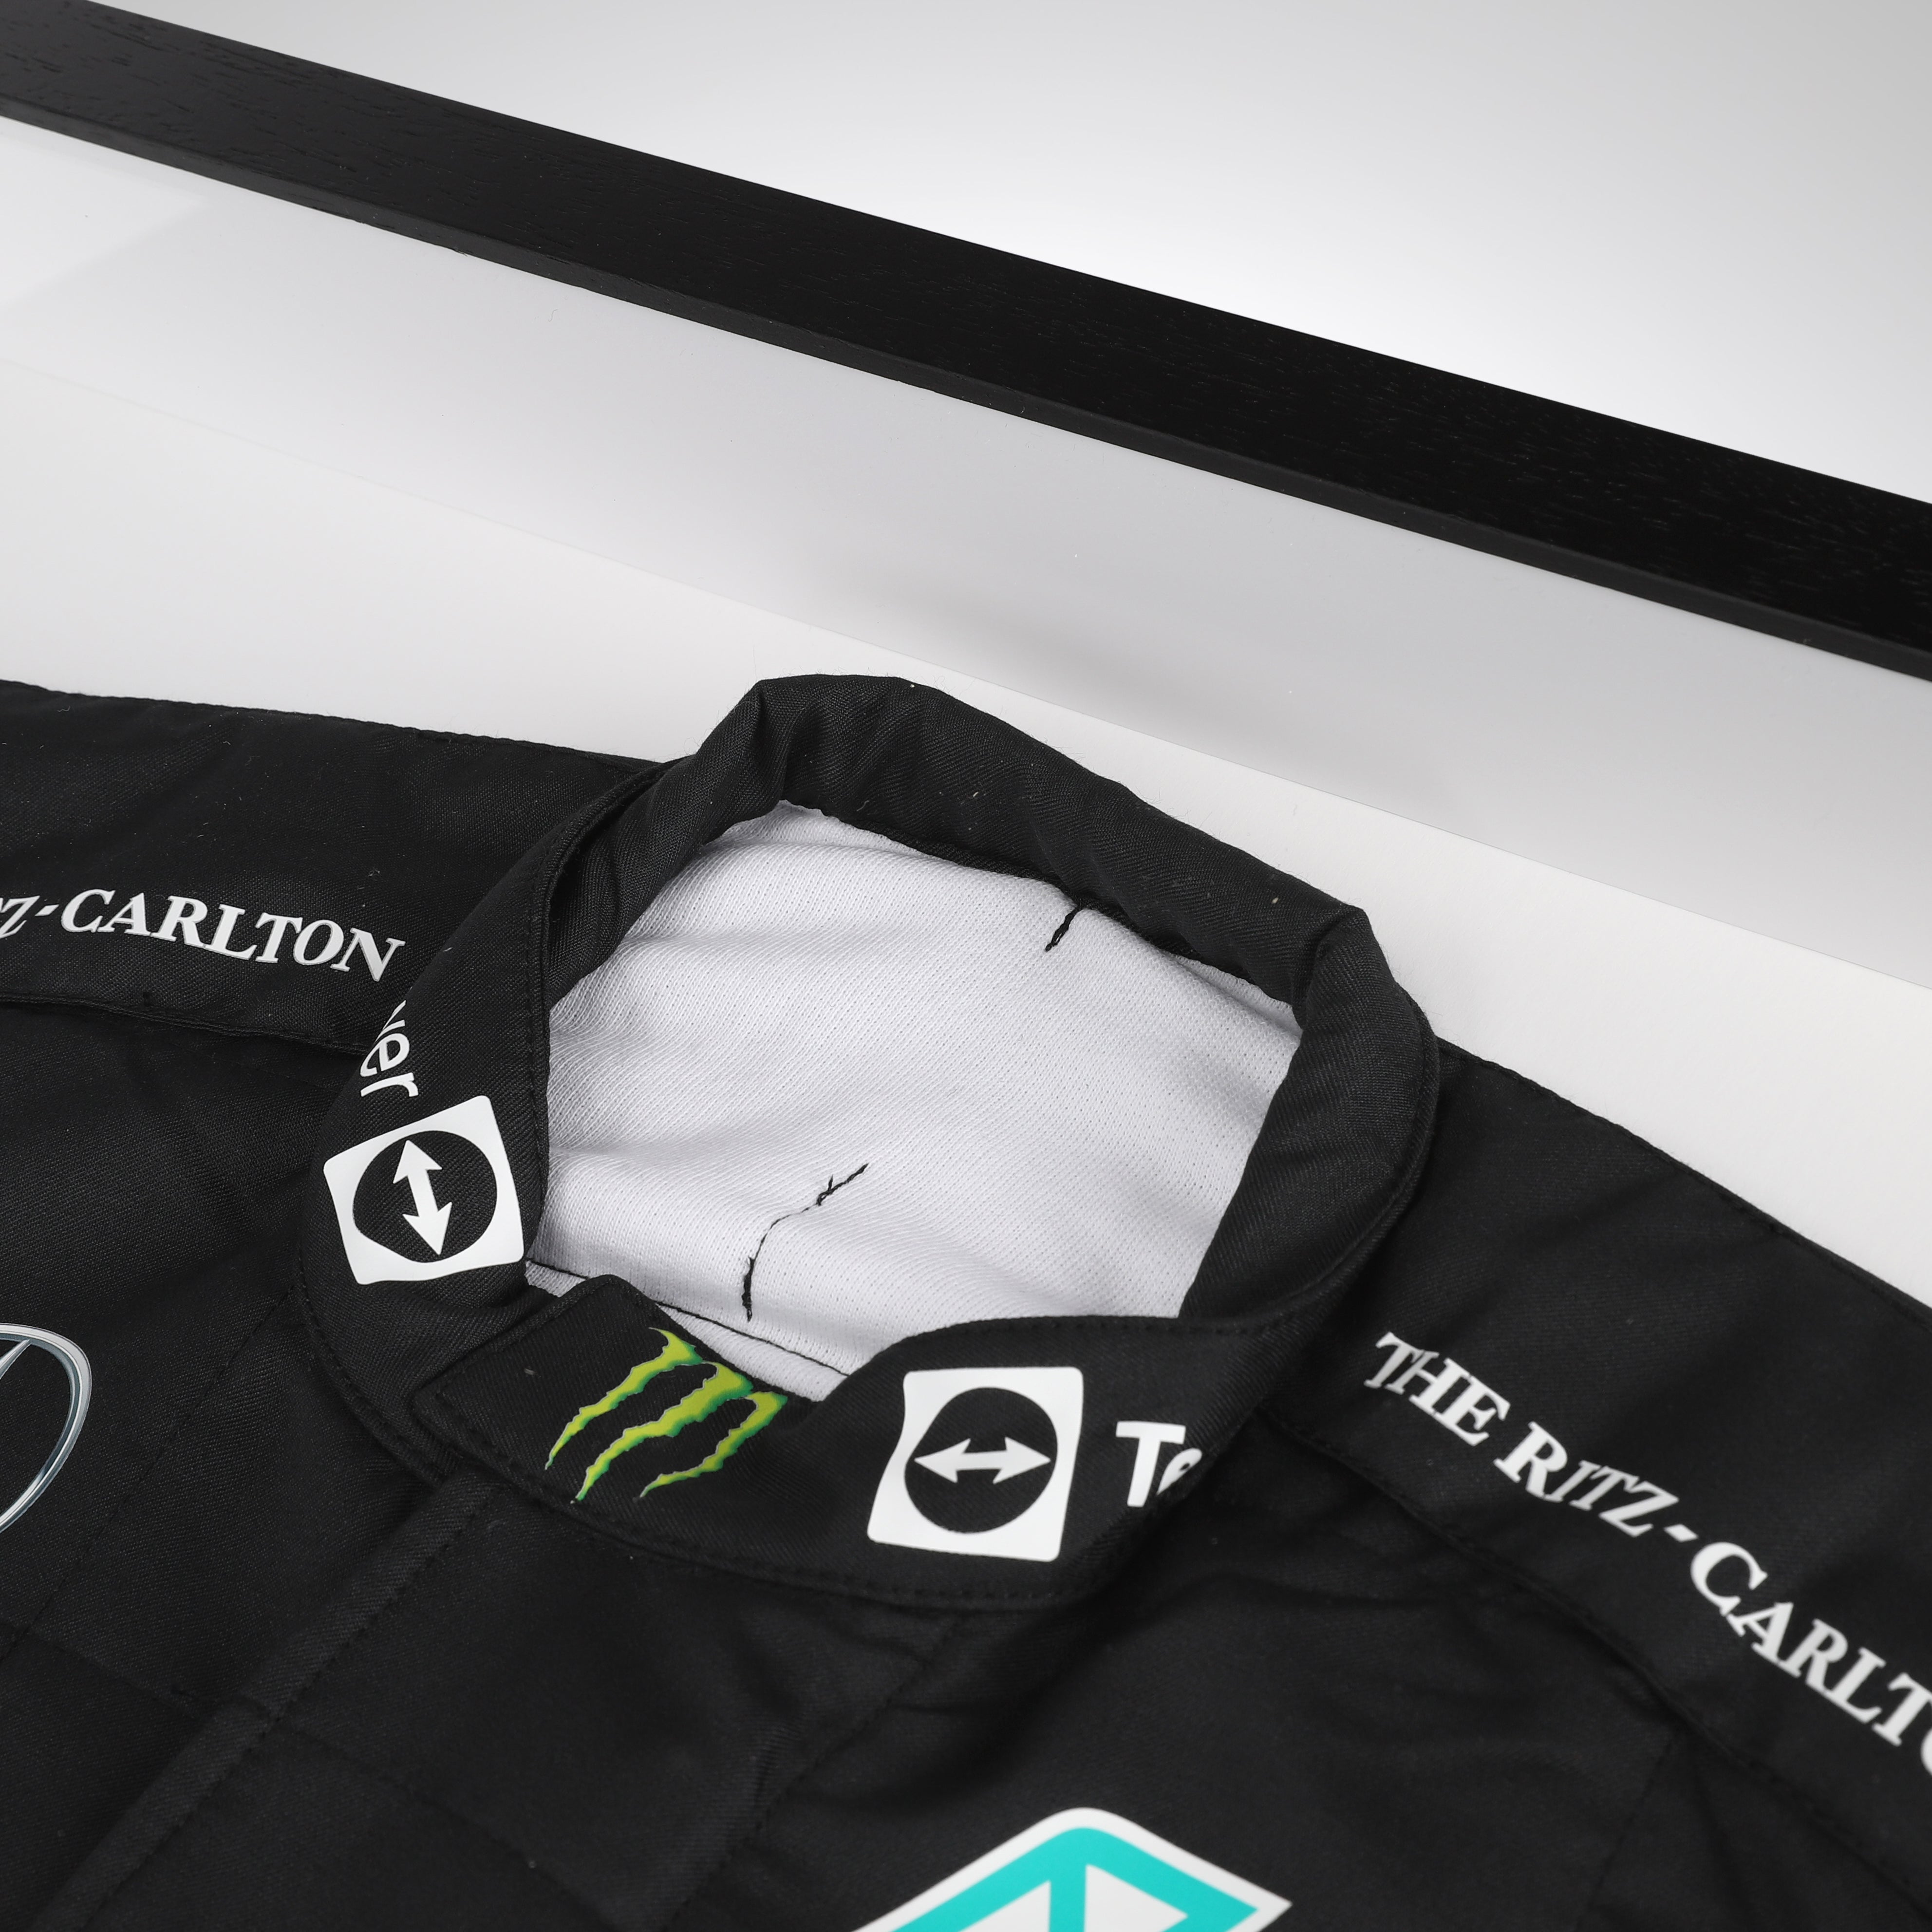 Officially Licensed 2022 Mercedes-AMG Petronas F1 Team Race Suit - George Russell Edition